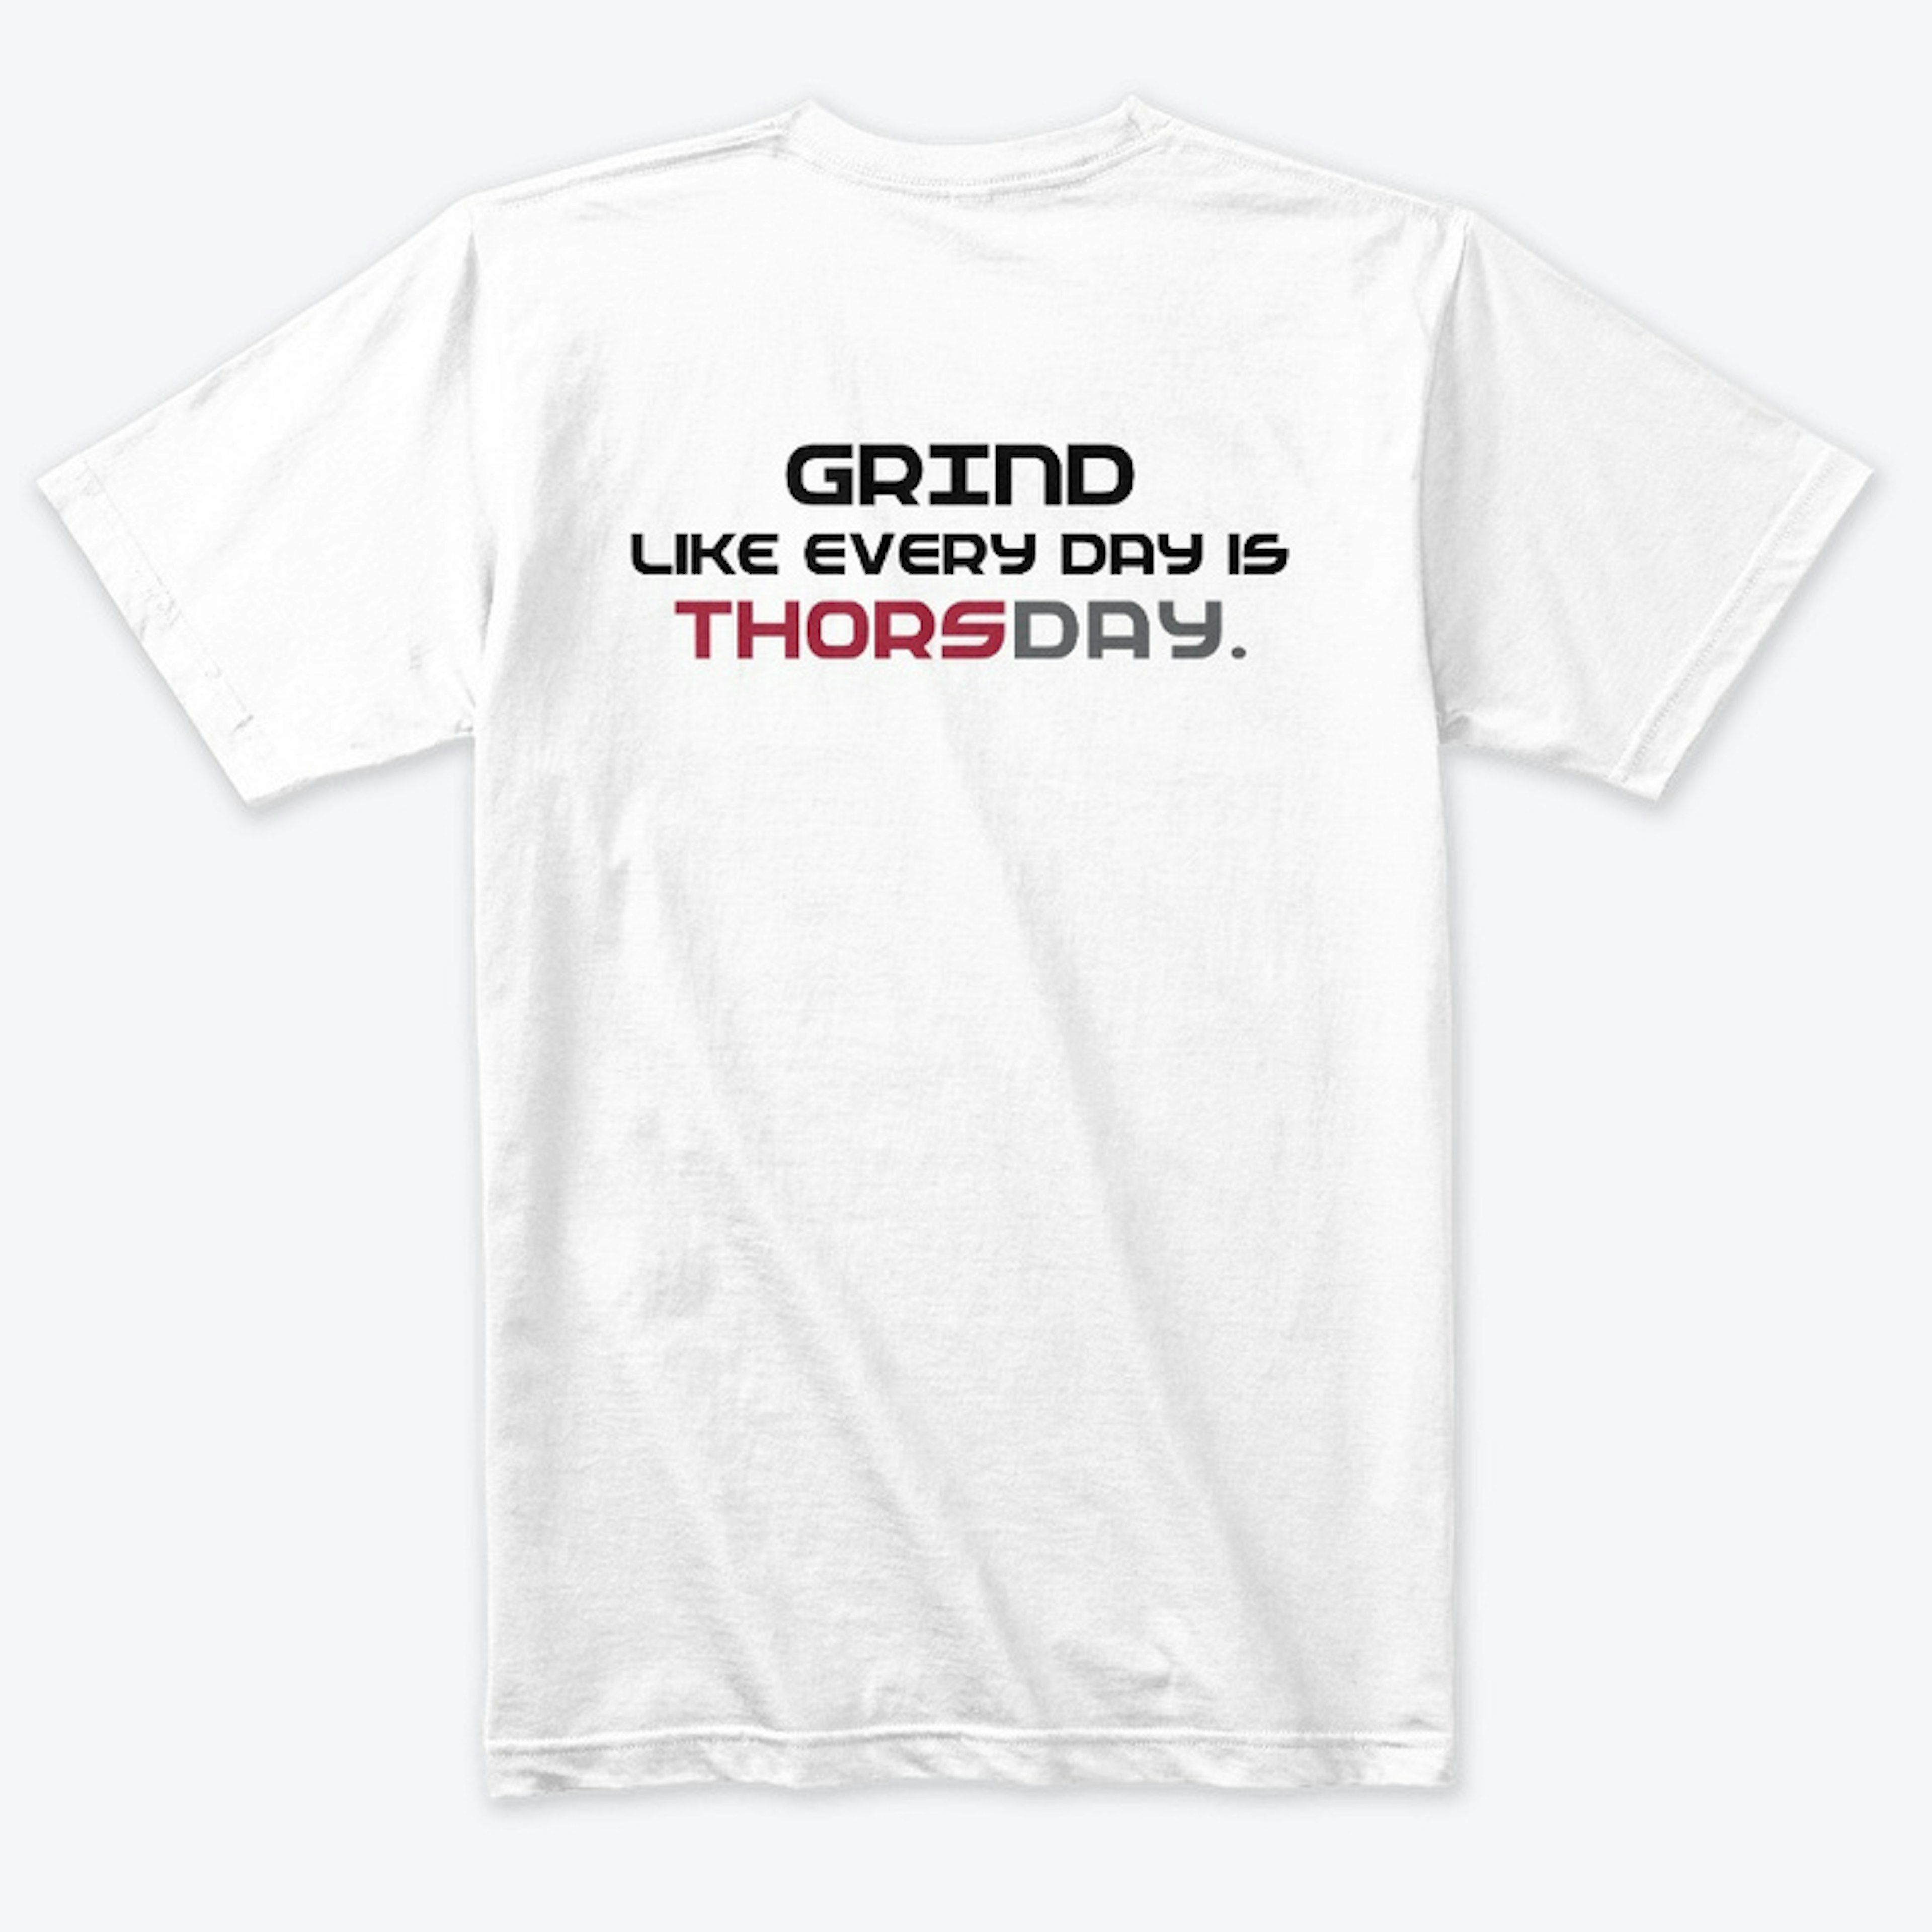 Every day is Thorsday